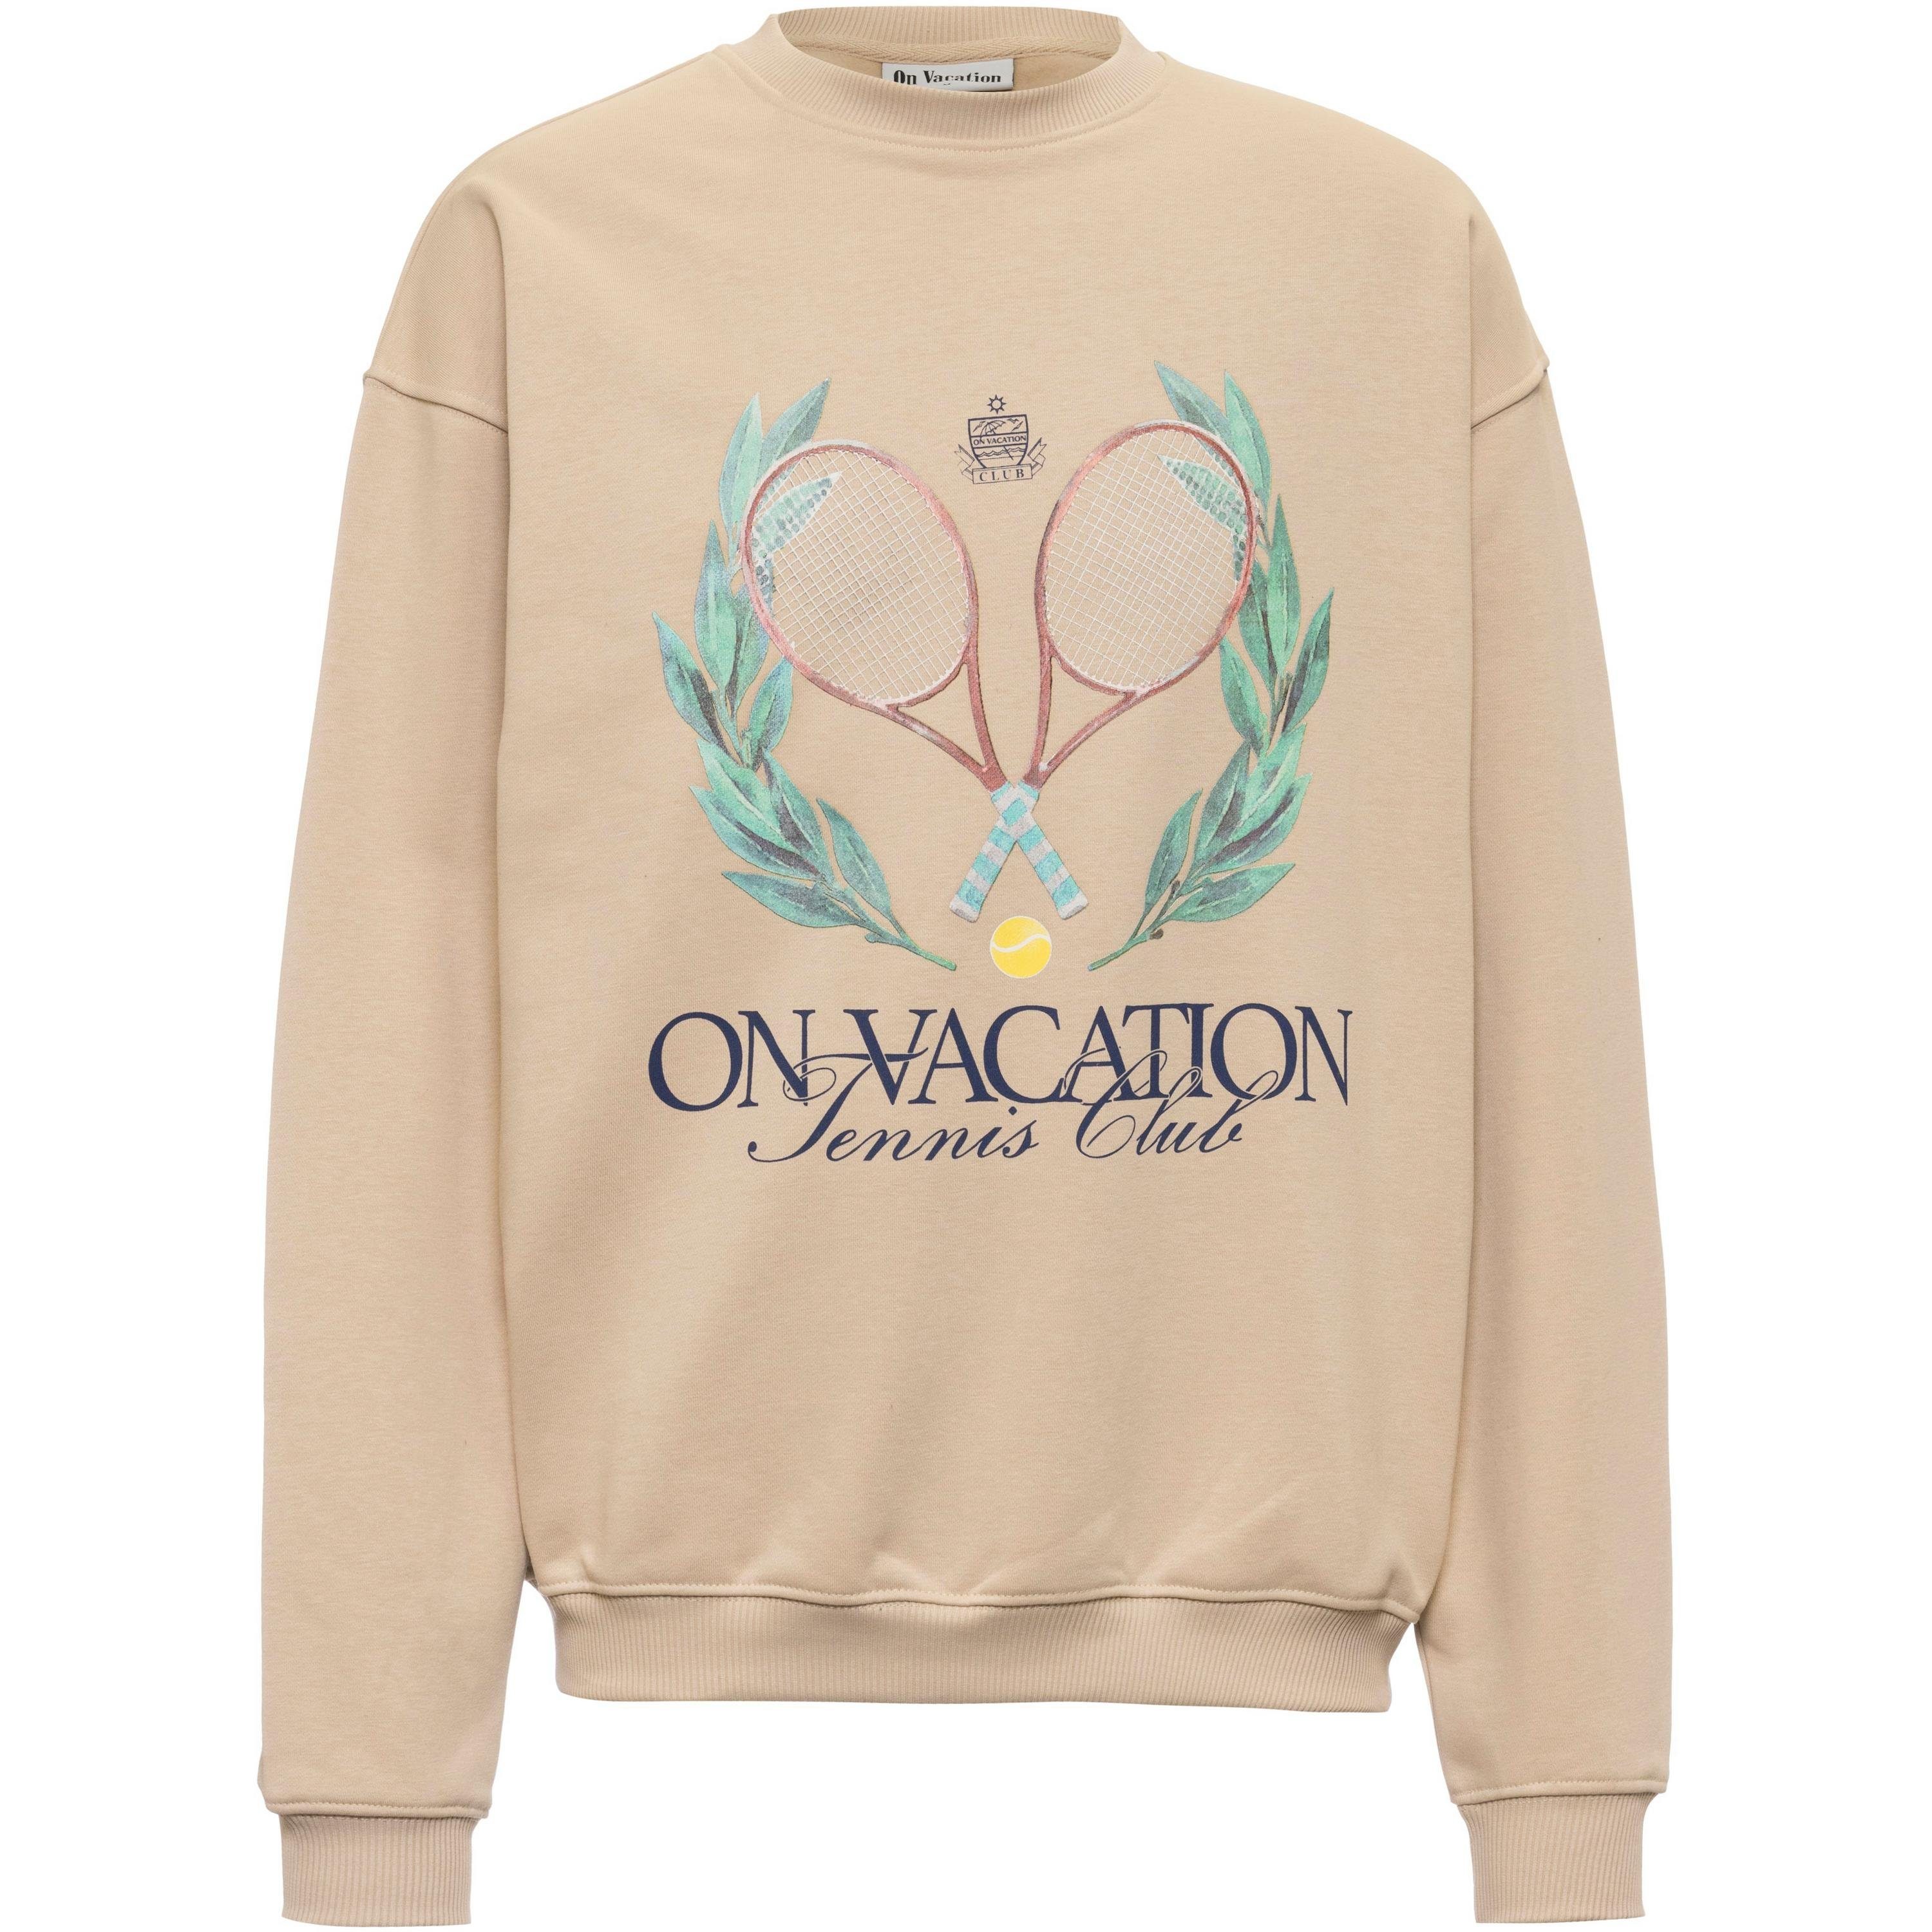 On Vacation Club Sweater Tennis